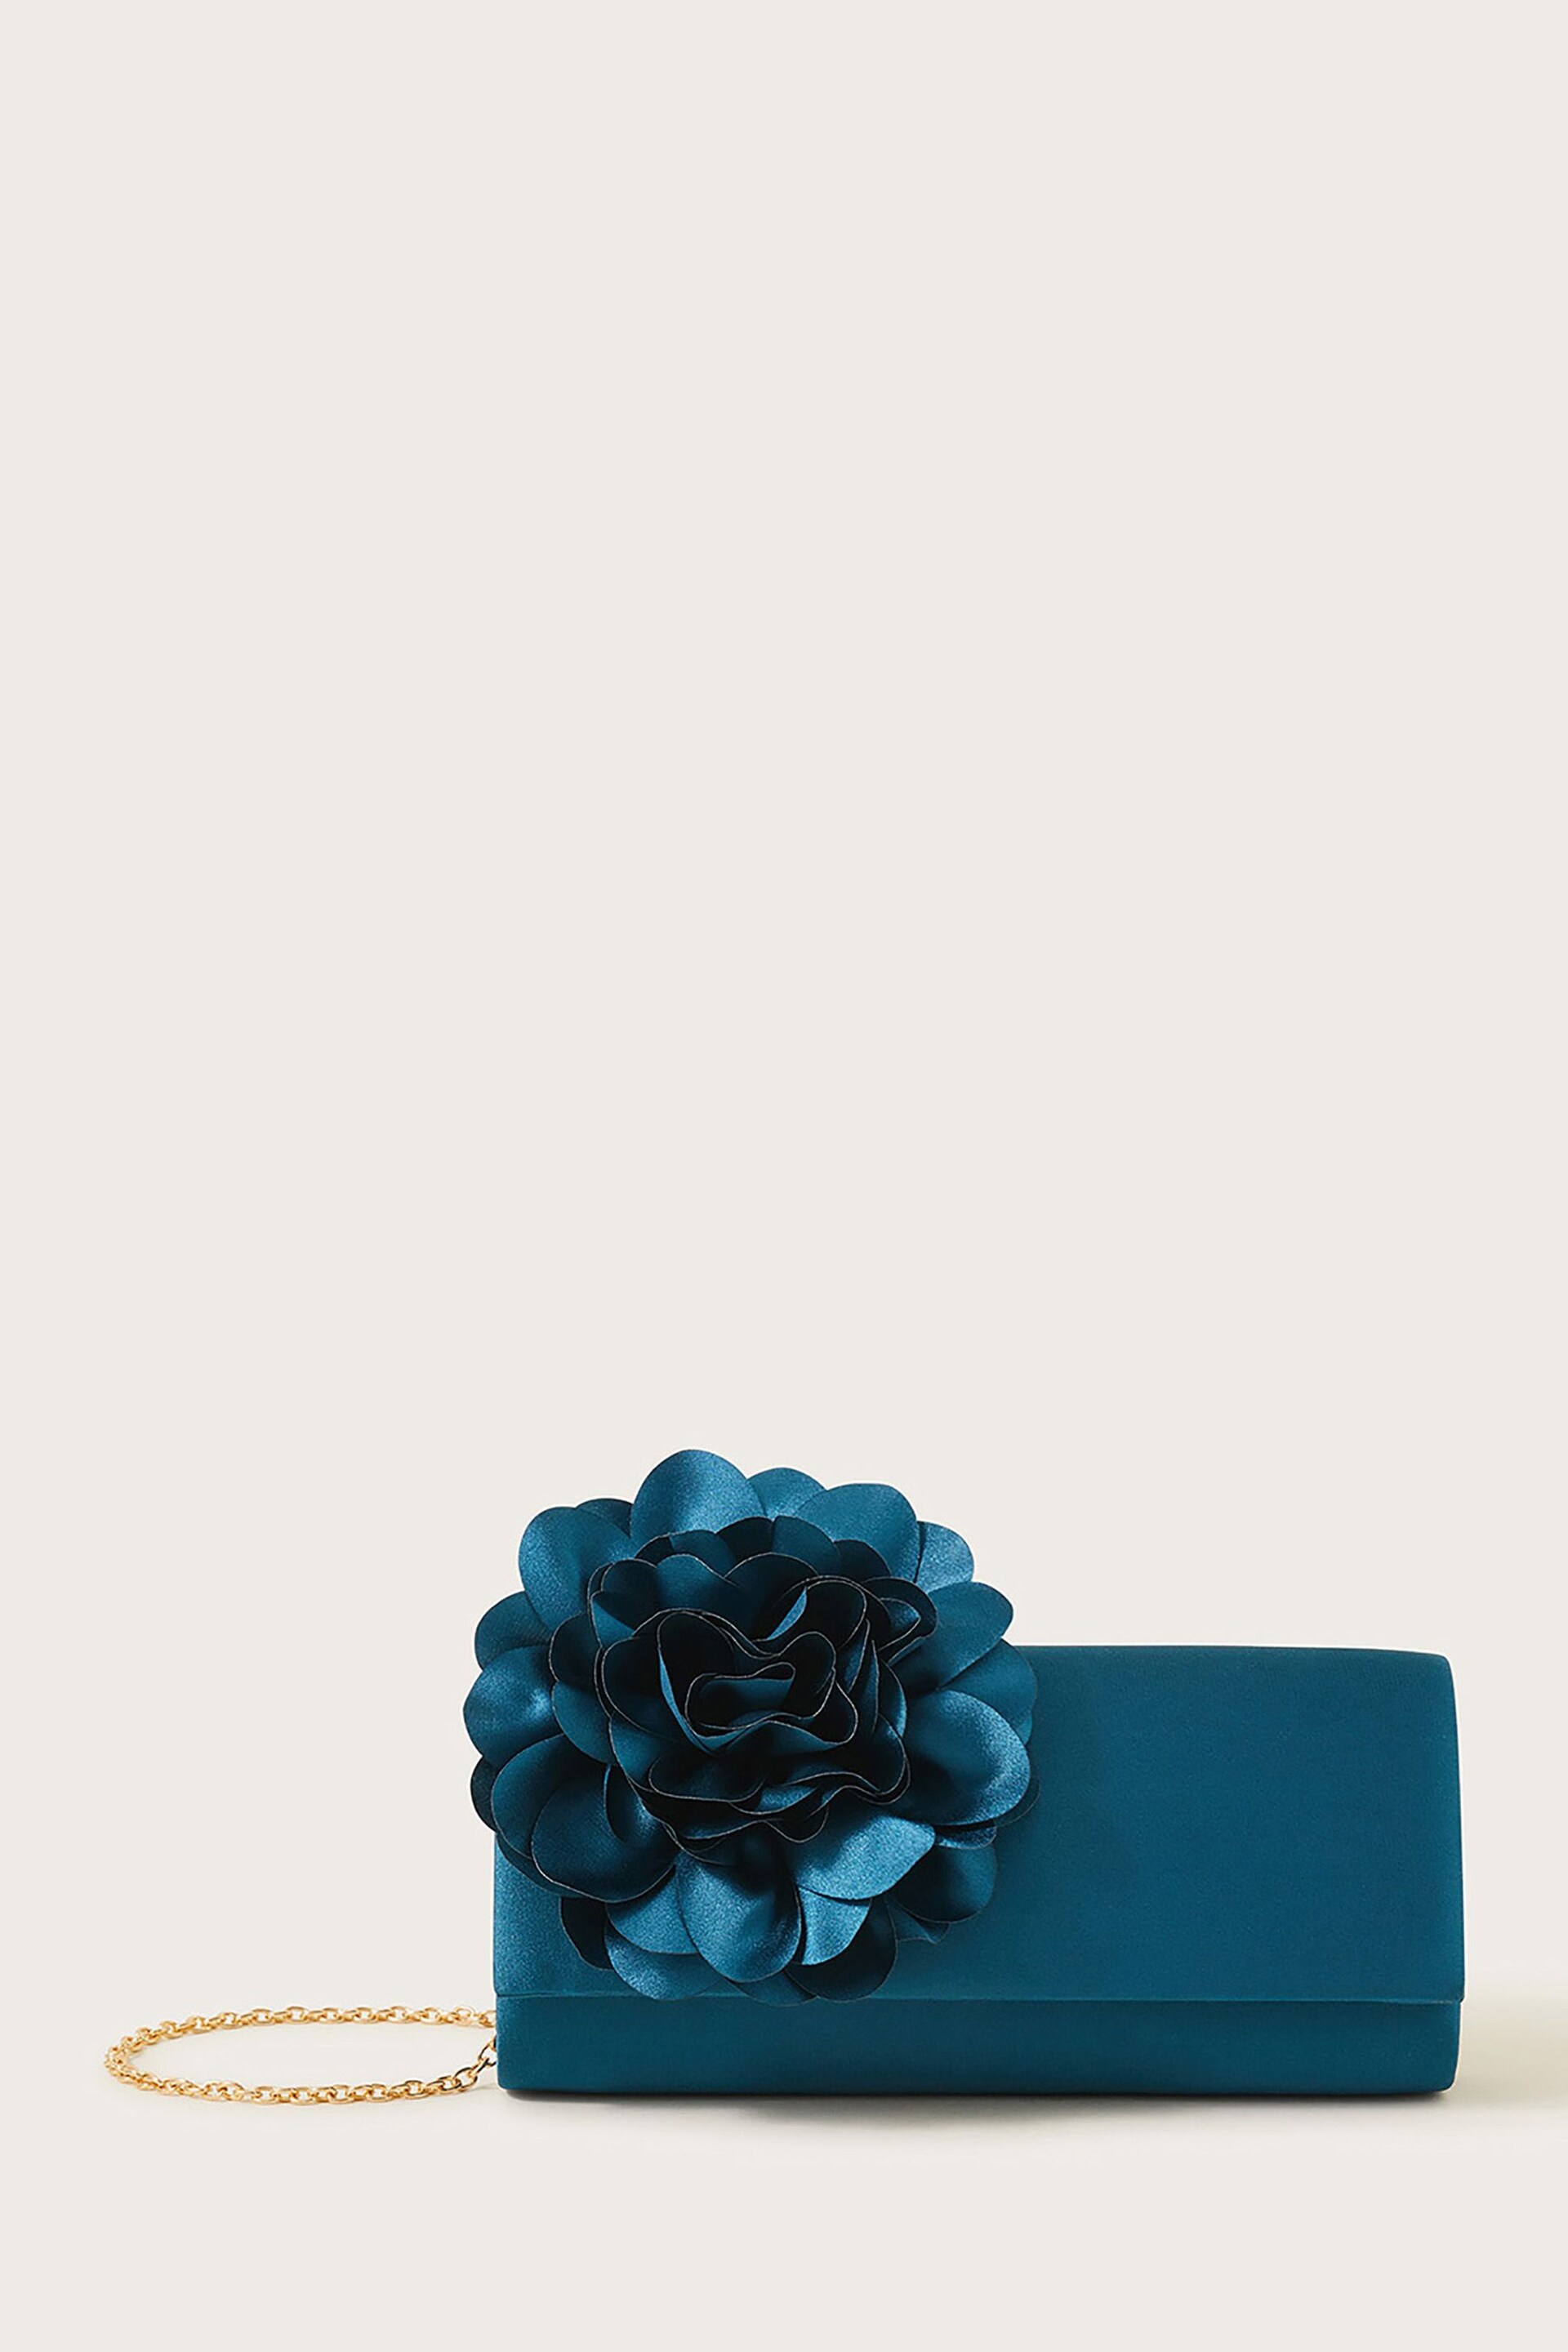 Monsoon Blue Corsage Occasion Bag - Image 1 of 3